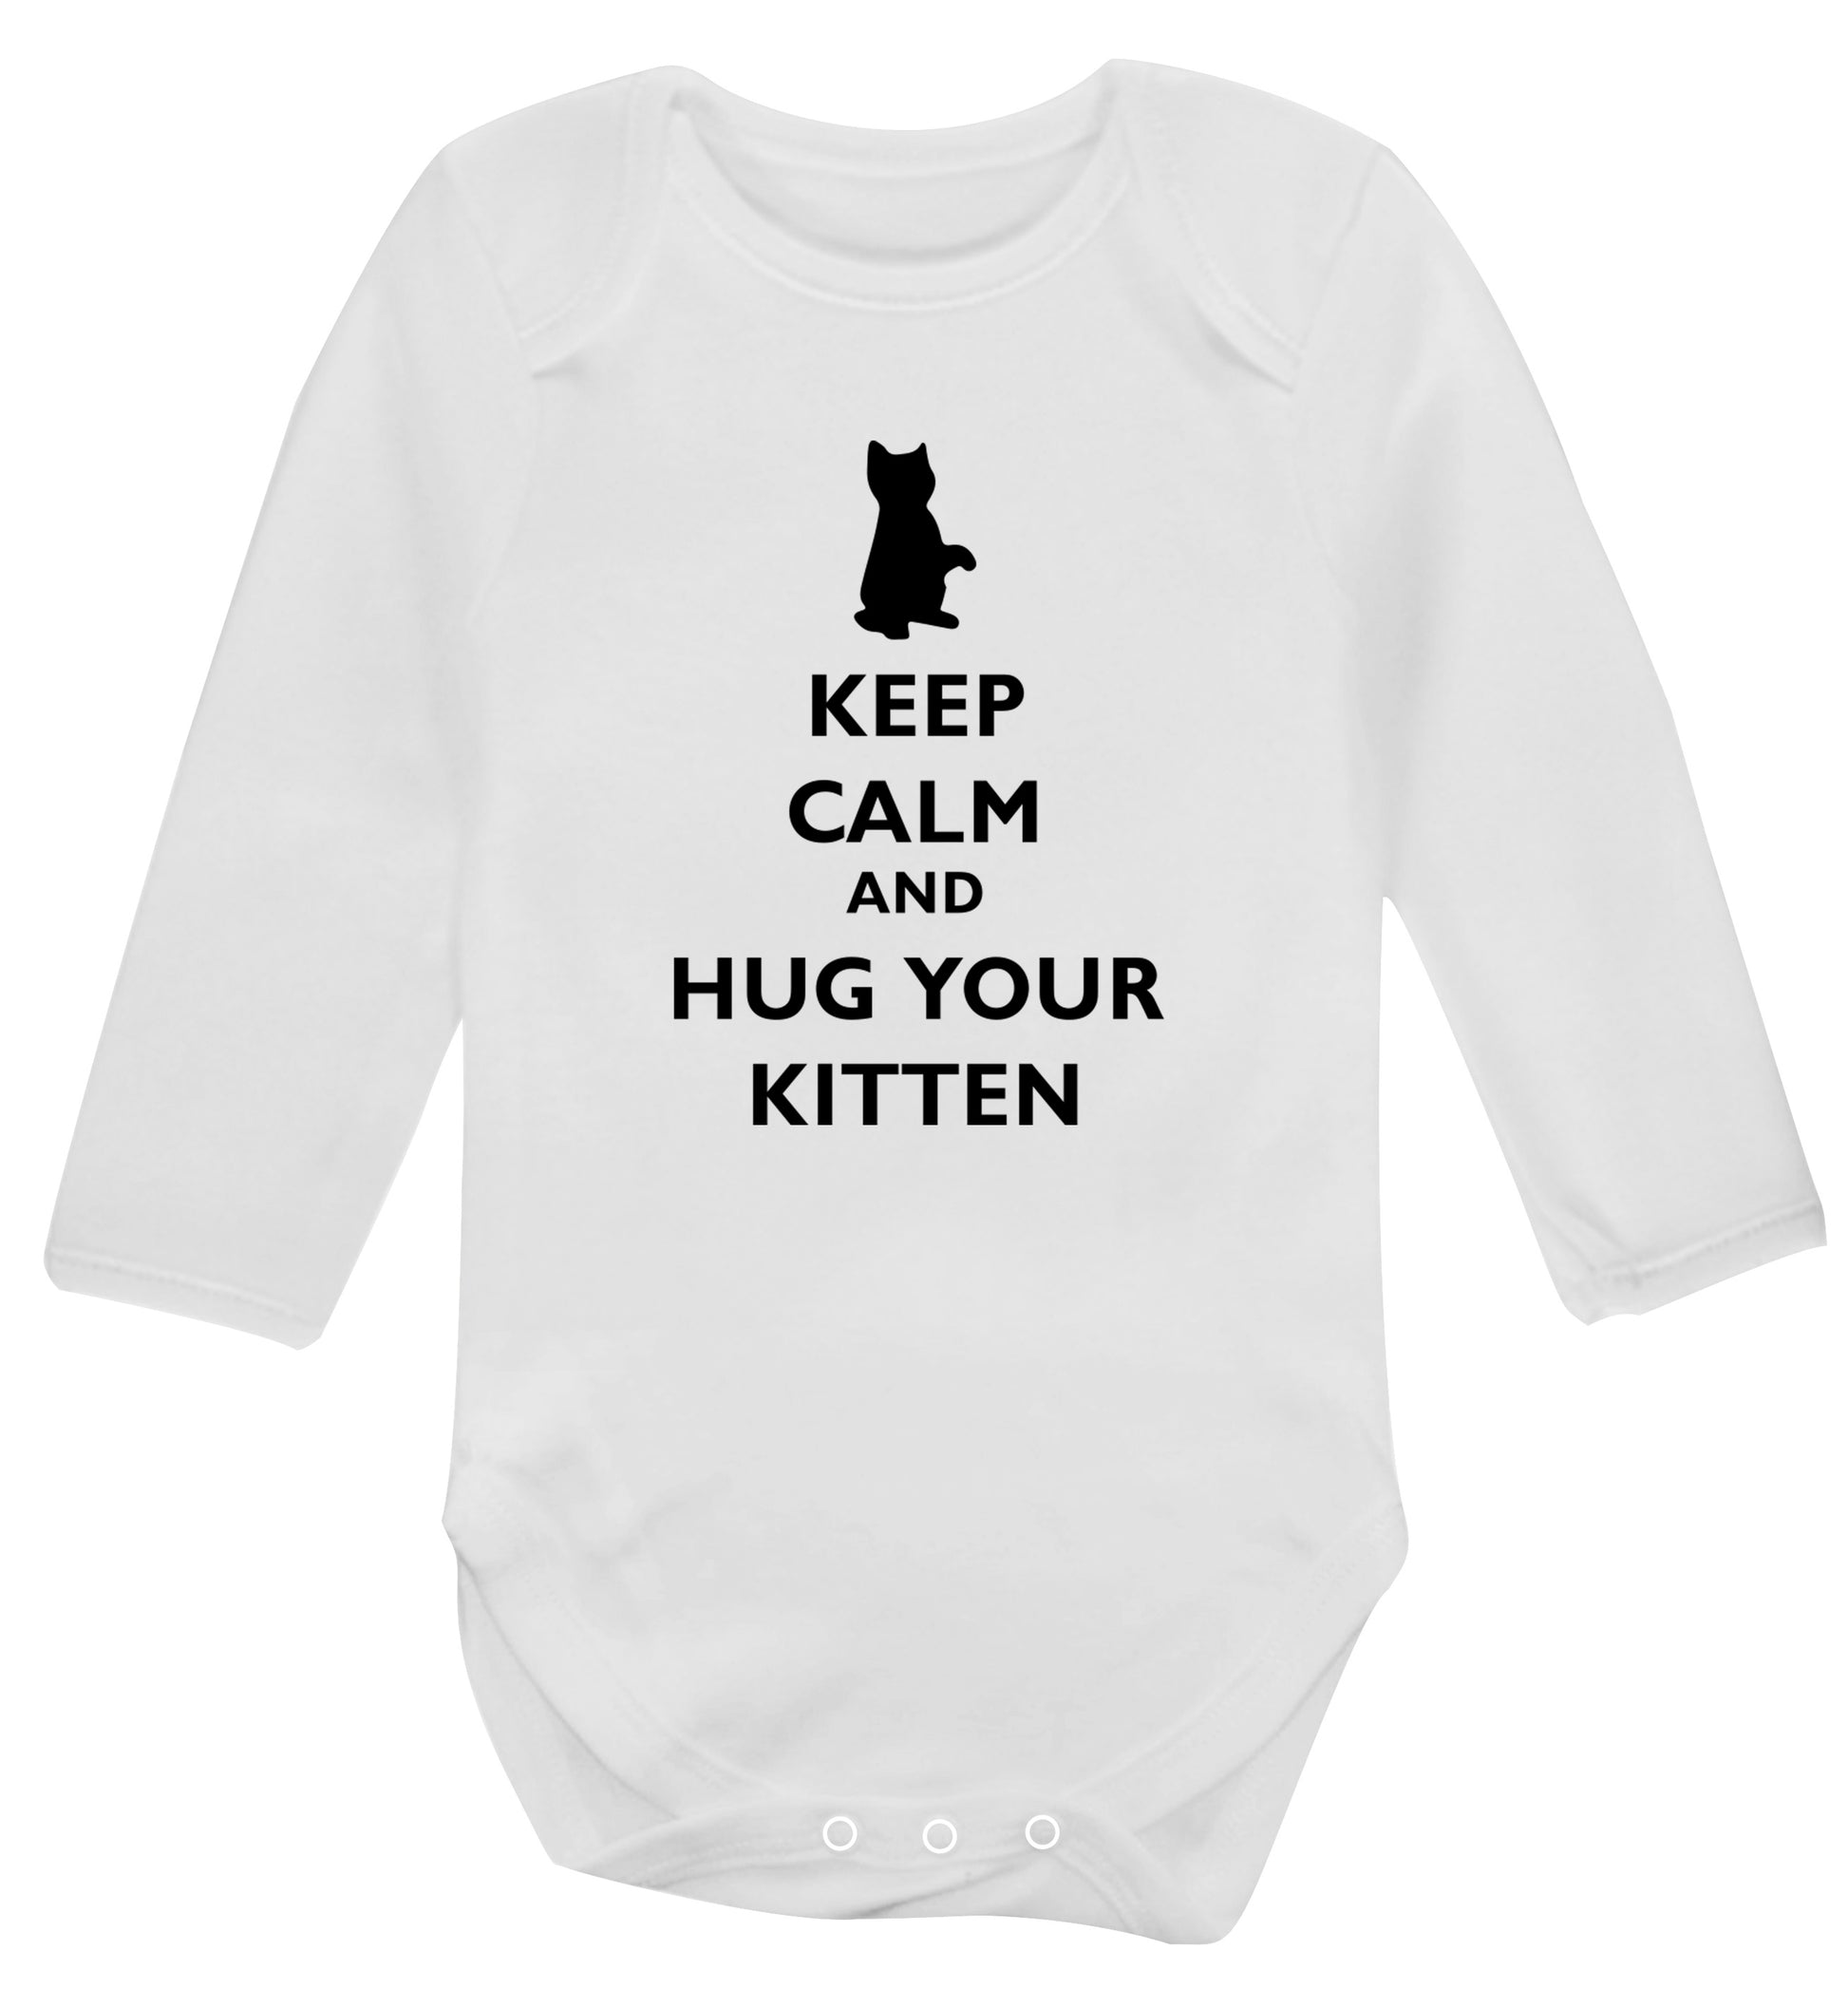 Keep calm and hug your kitten Baby Vest long sleeved white 6-12 months